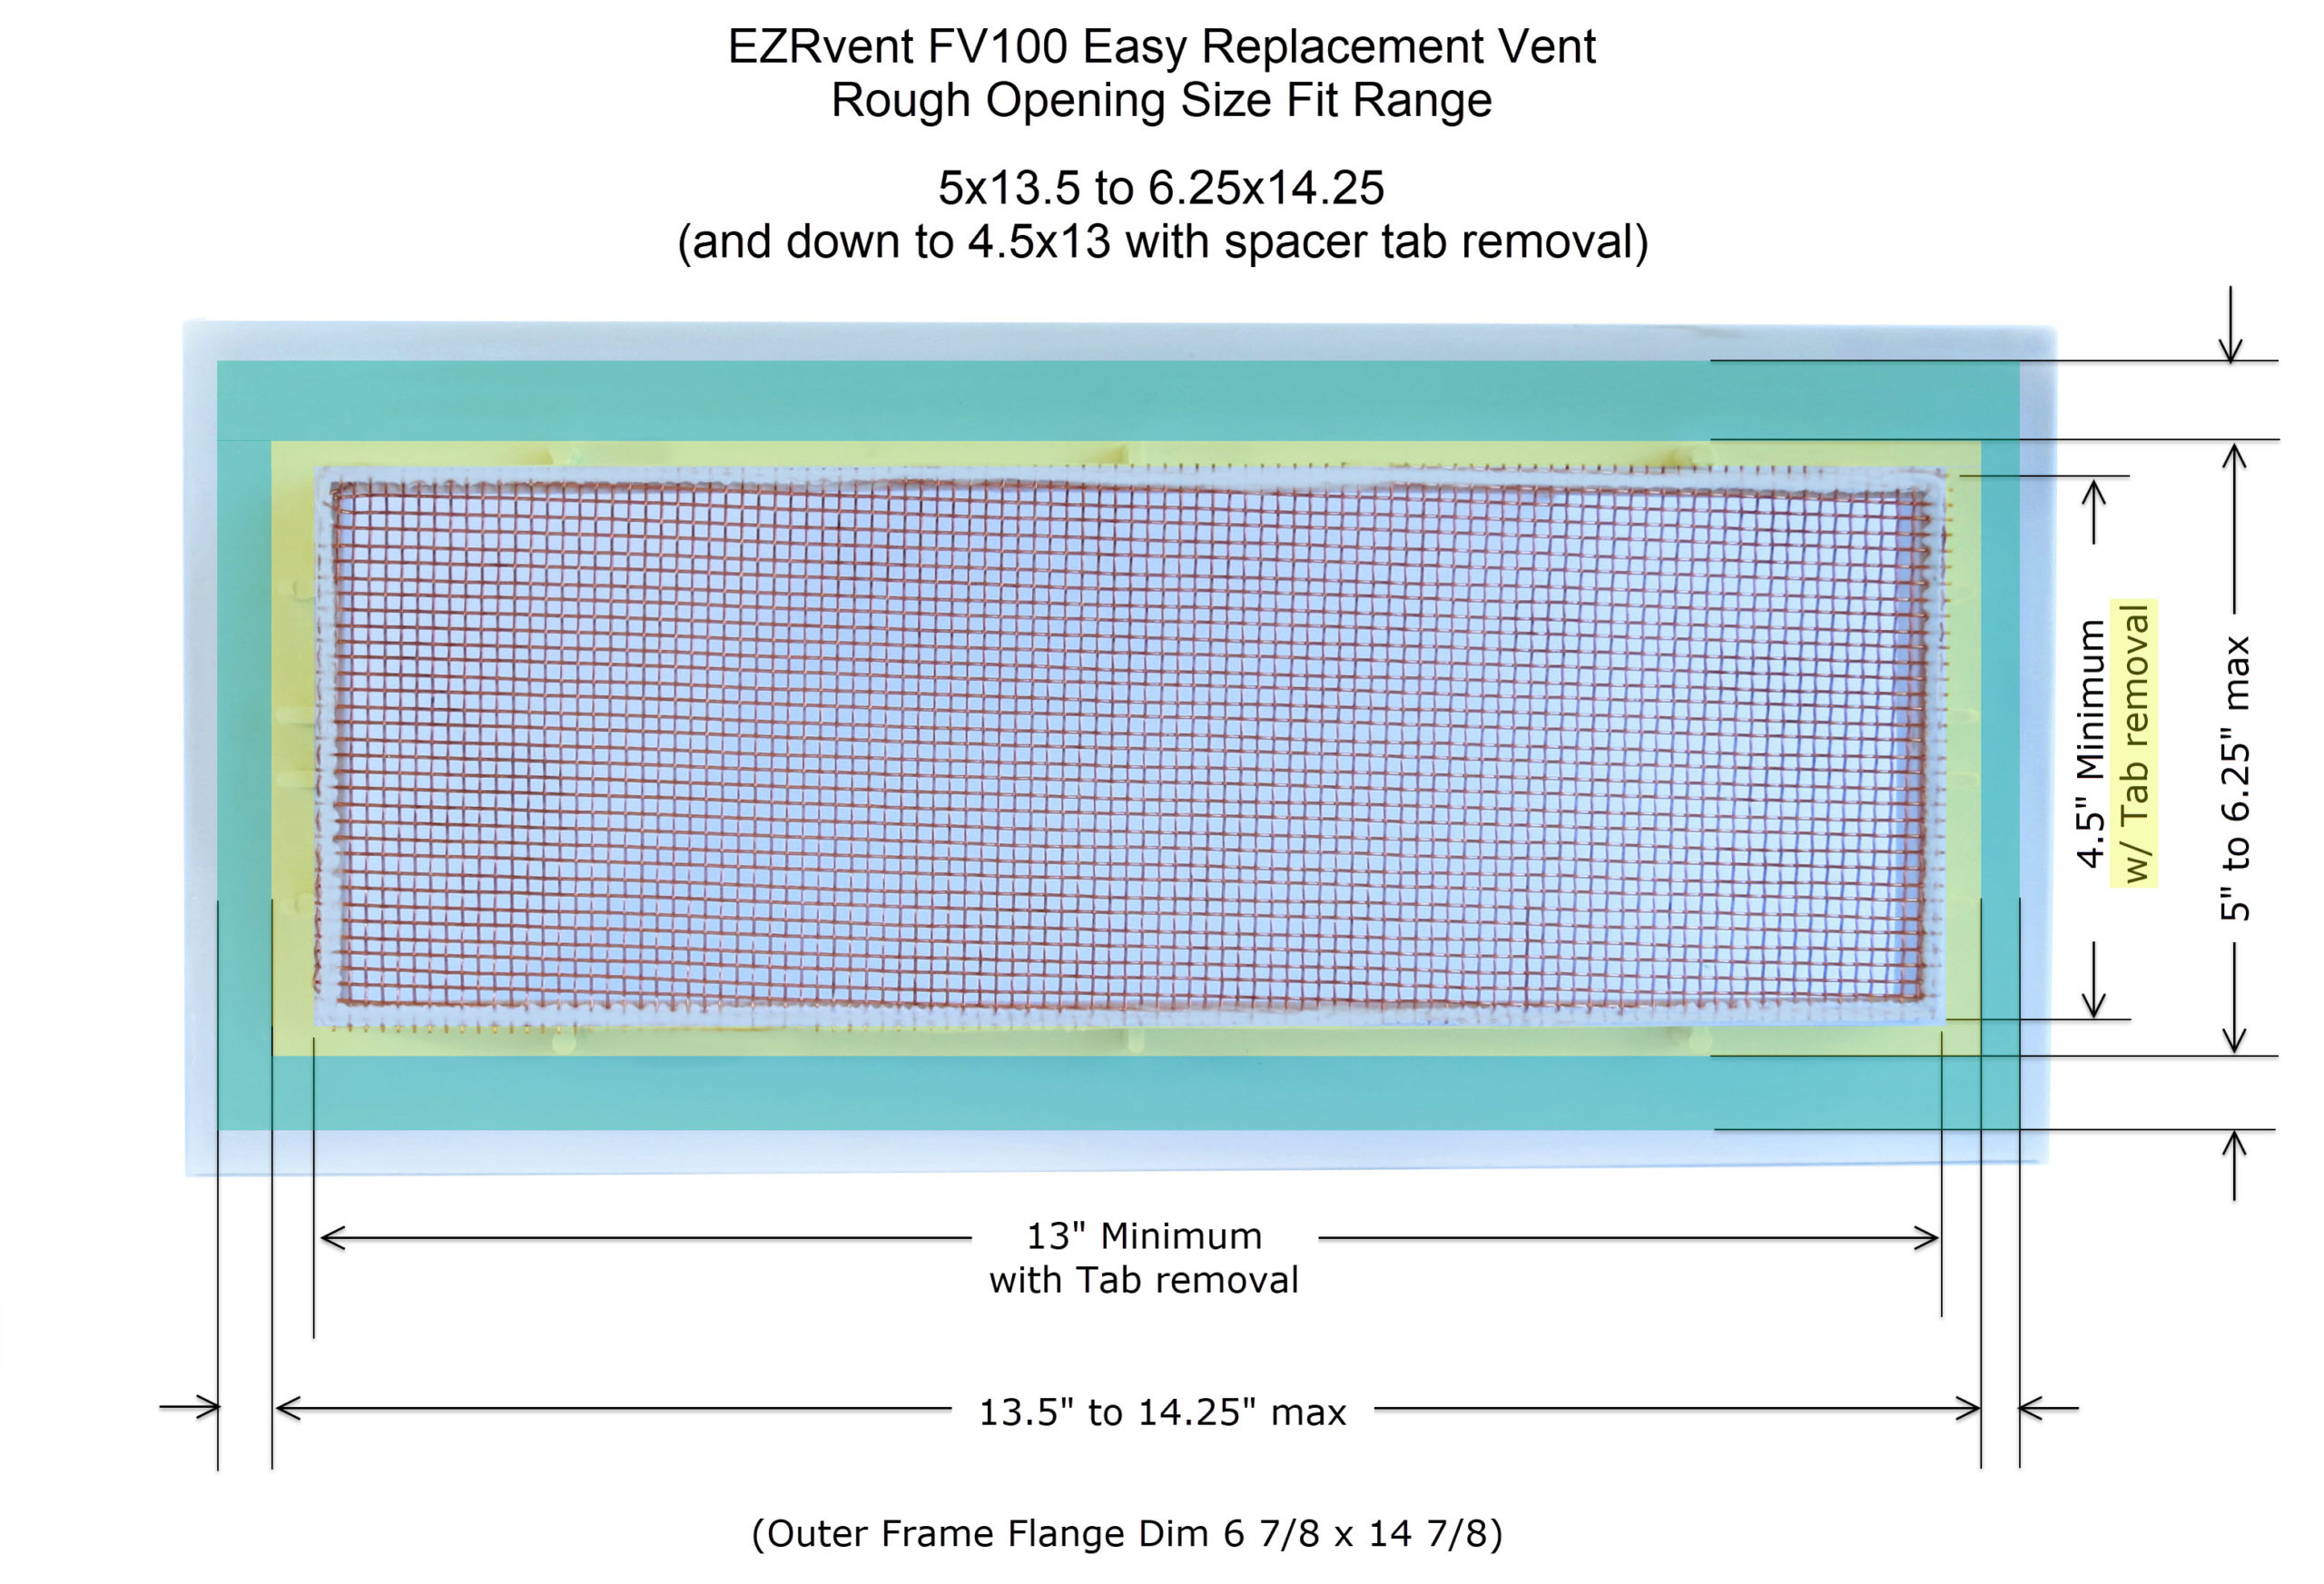 EZRvent FV100 Easy Replacement Vent - rough opening fit size range